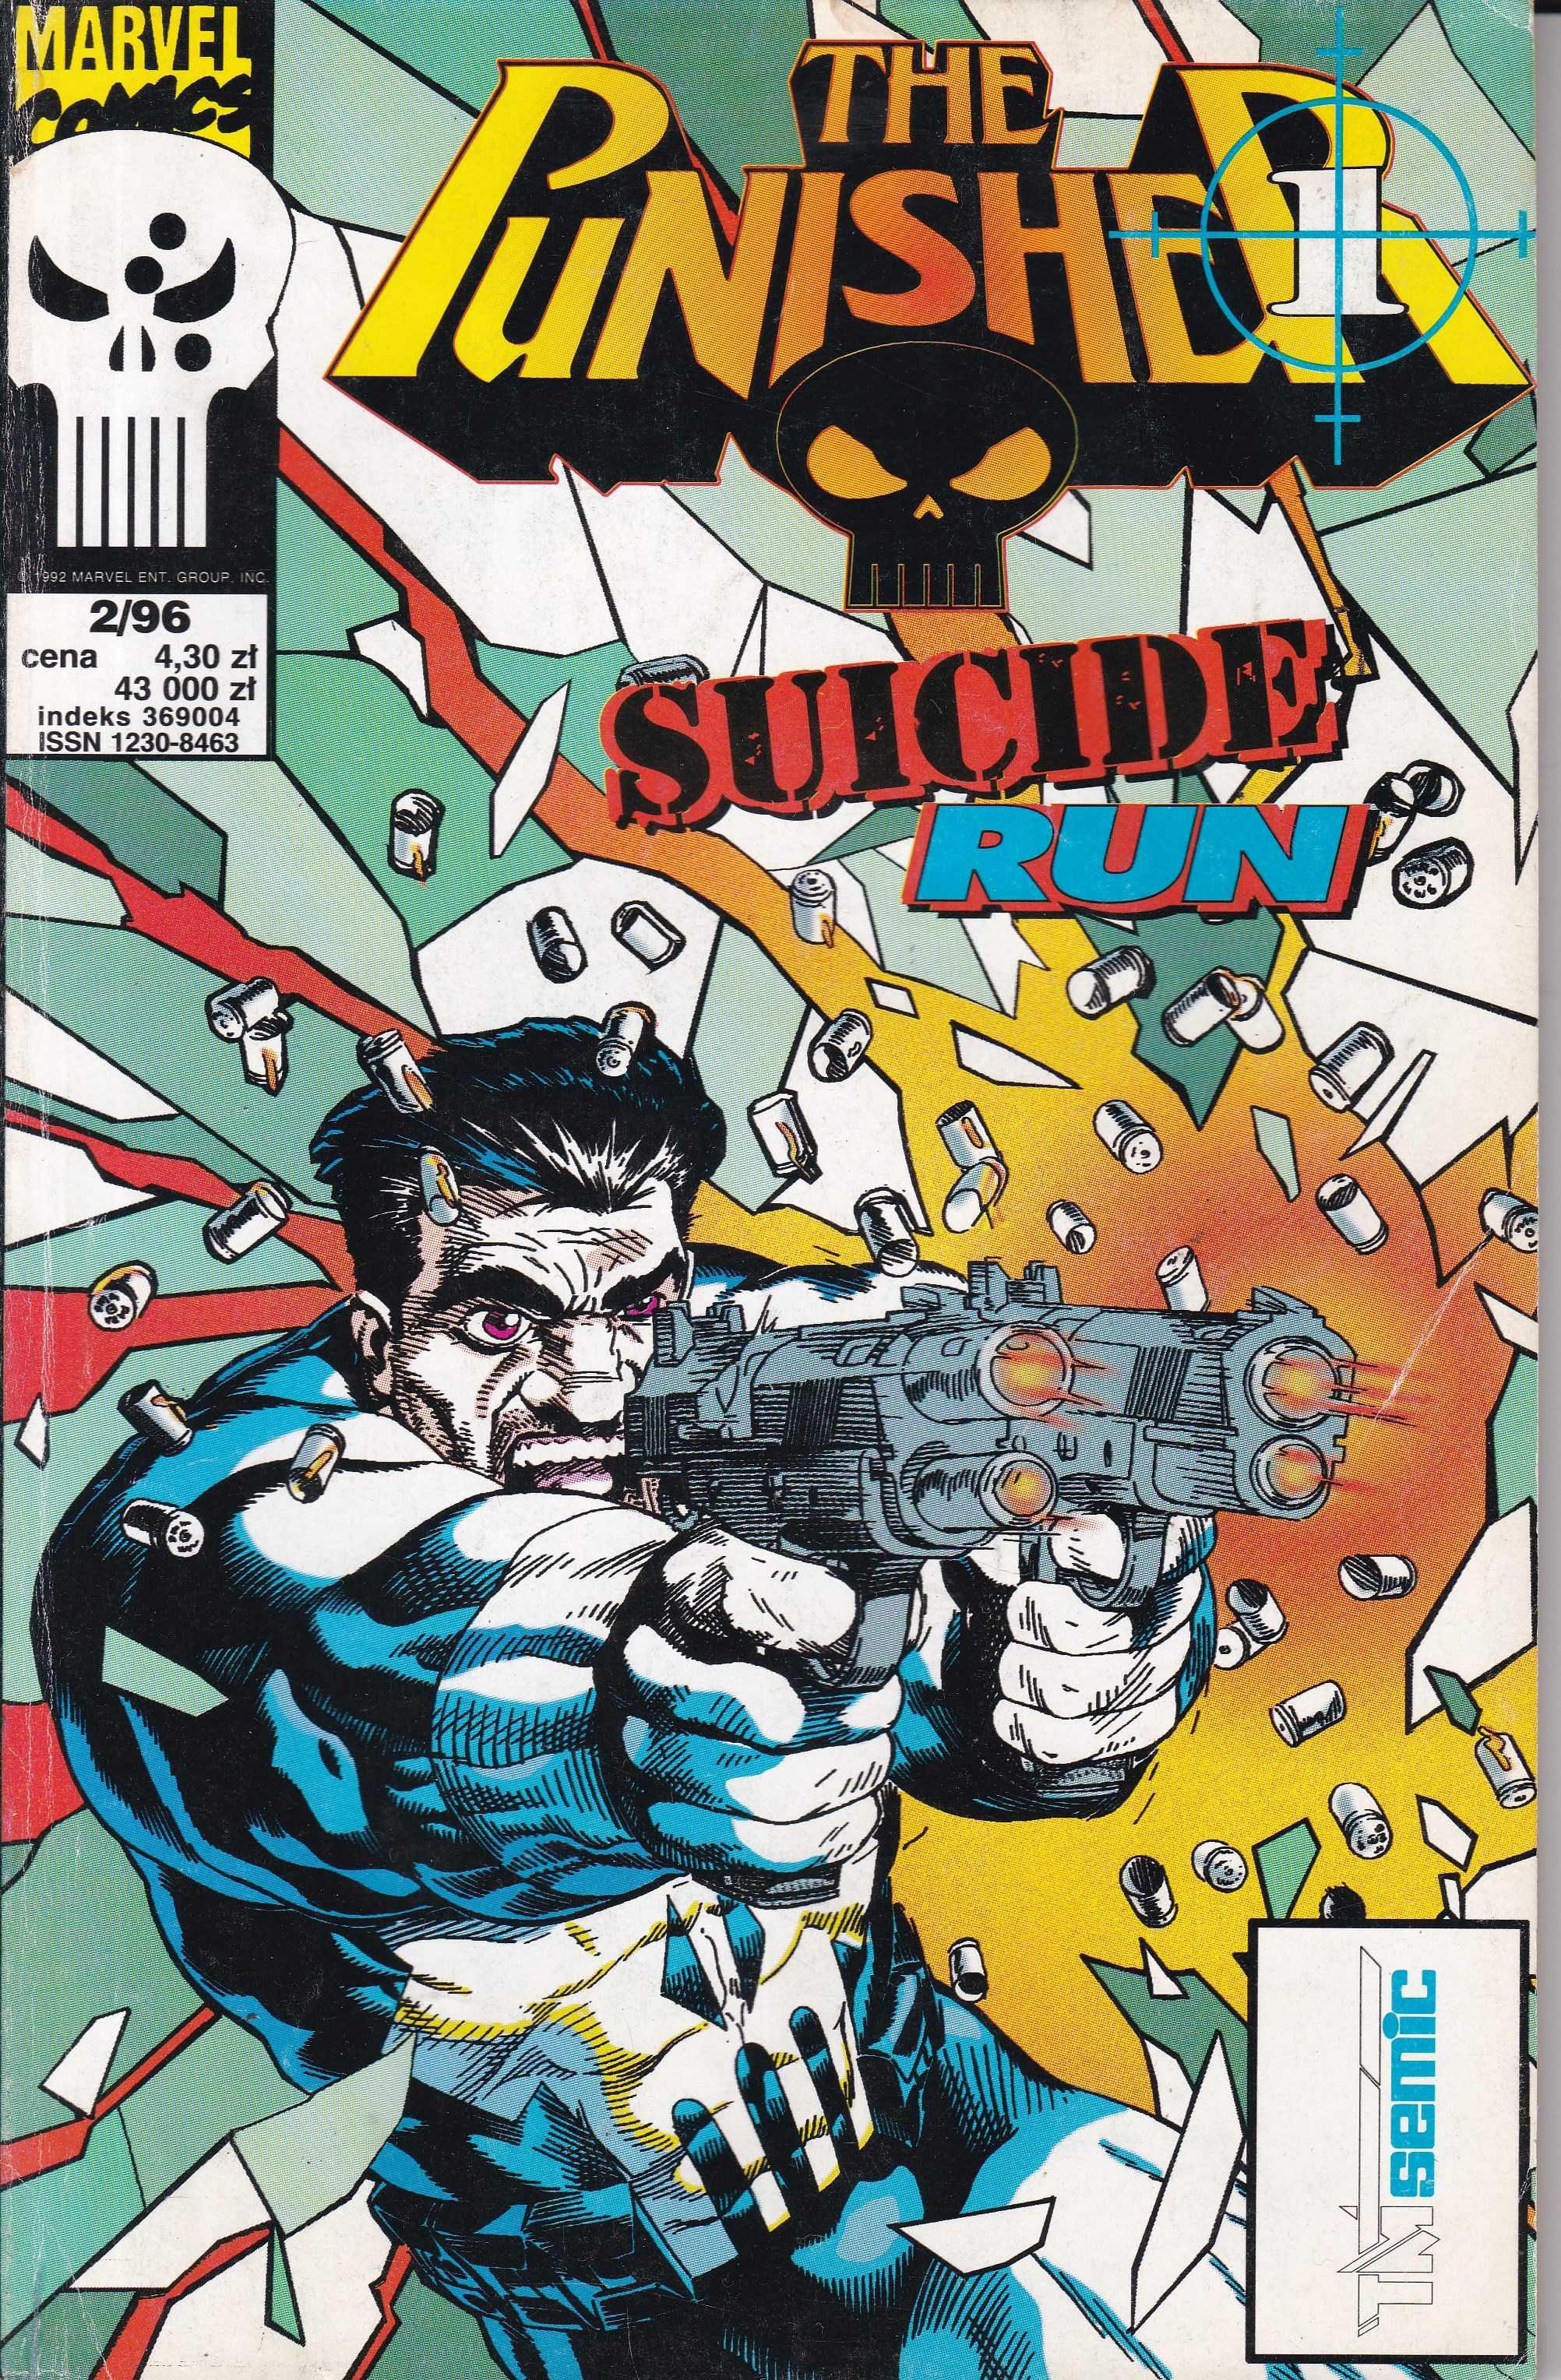 The Punisher Suicide run 2/96